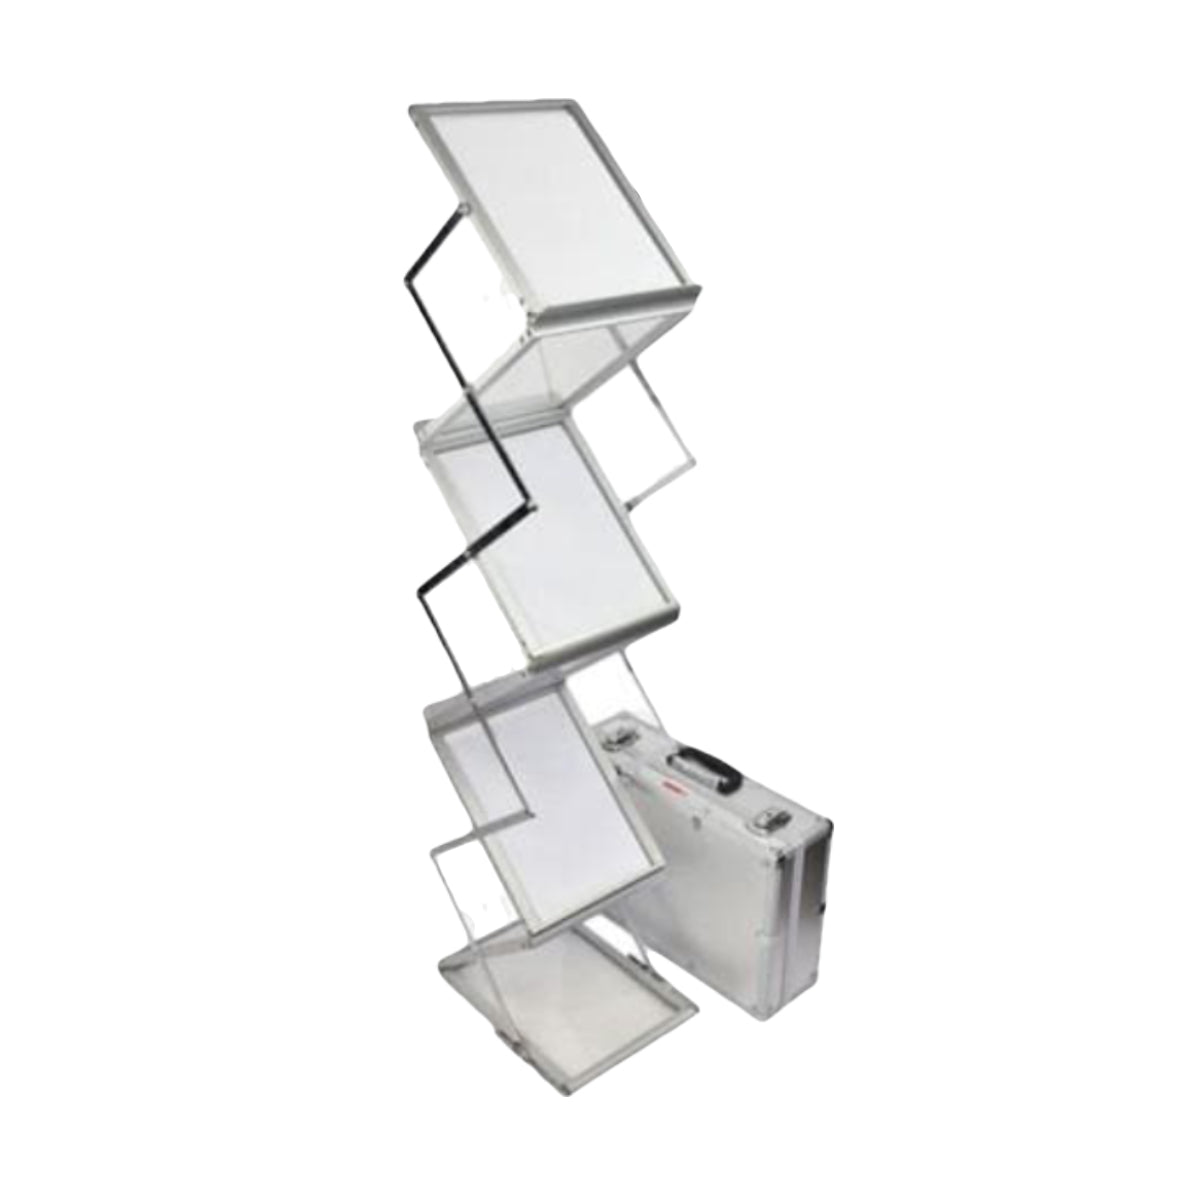 Zigzag Brochure Stand A4, Foldable, Silvery/White